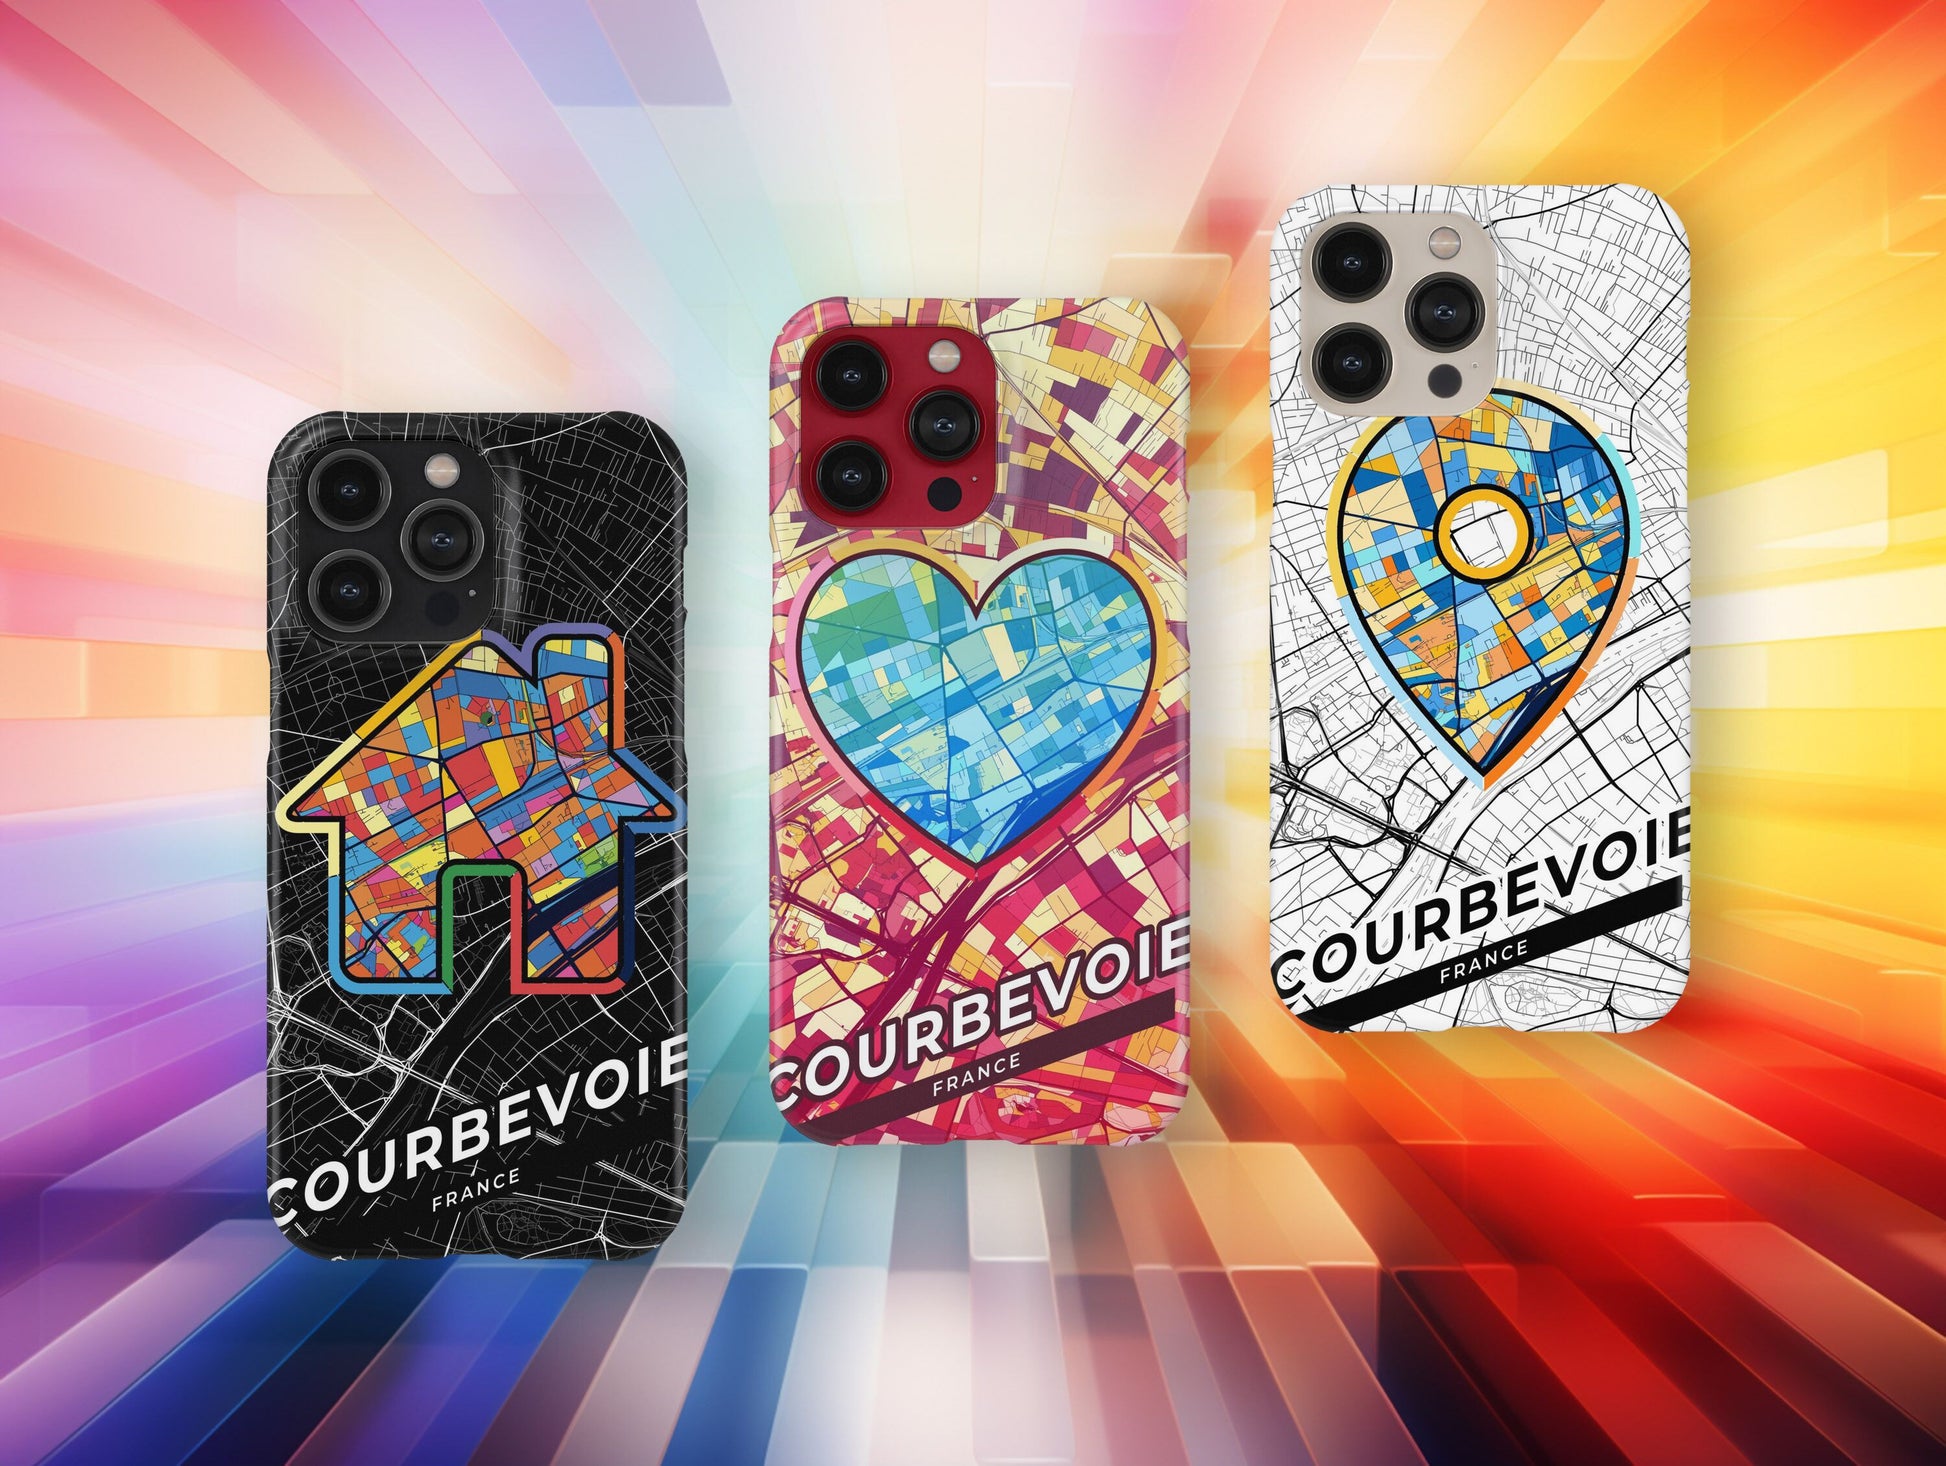 Courbevoie France slim phone case with colorful icon. Birthday, wedding or housewarming gift. Couple match cases.